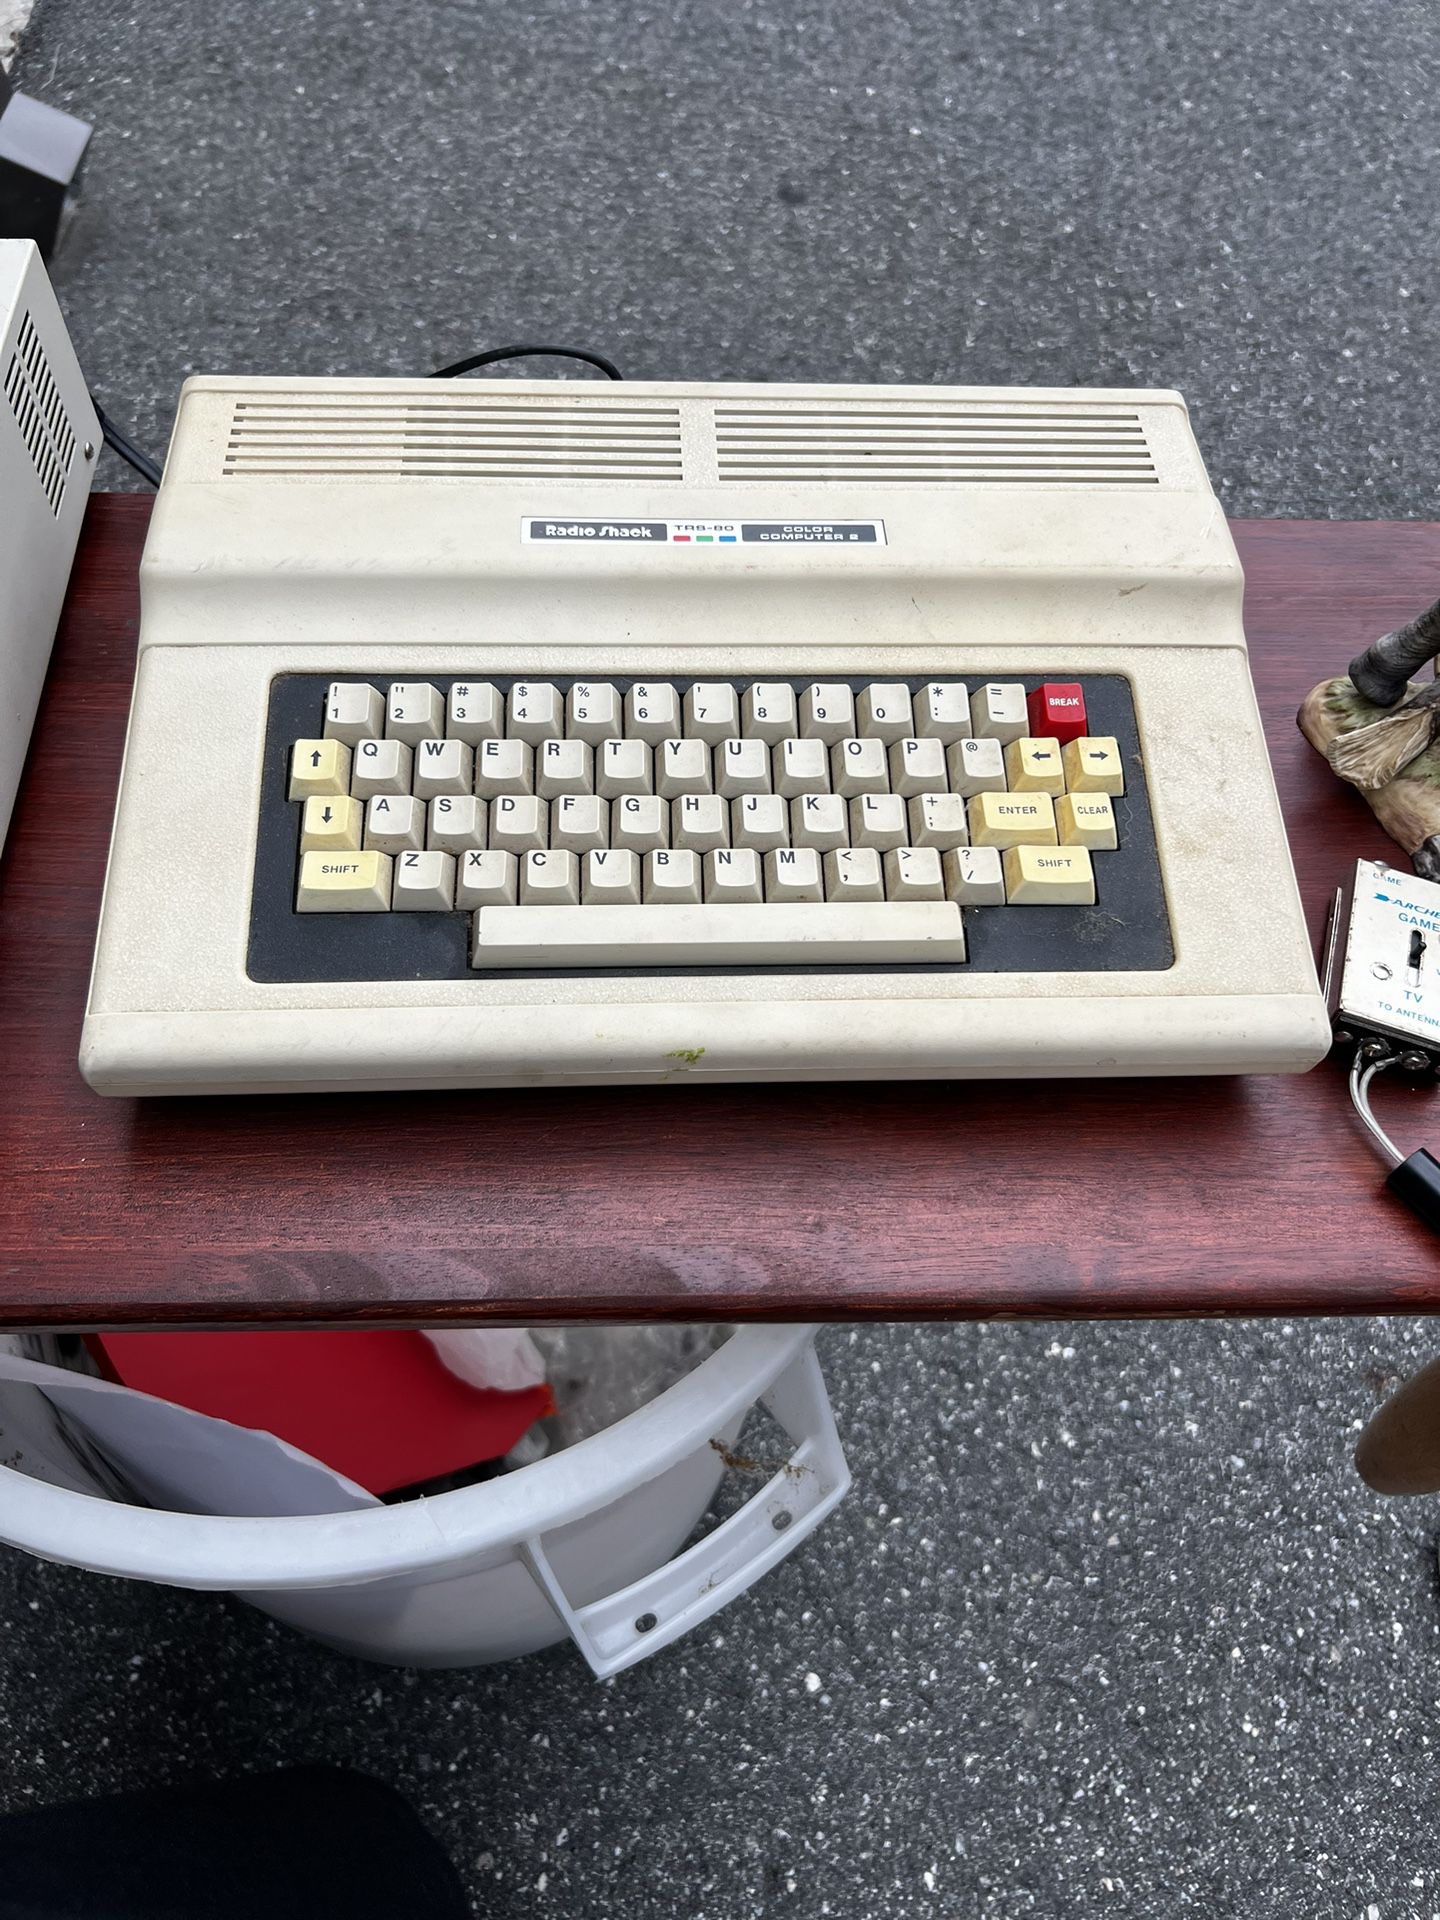 Radio Shack Tandy TRS 80 Color Computer With Games 